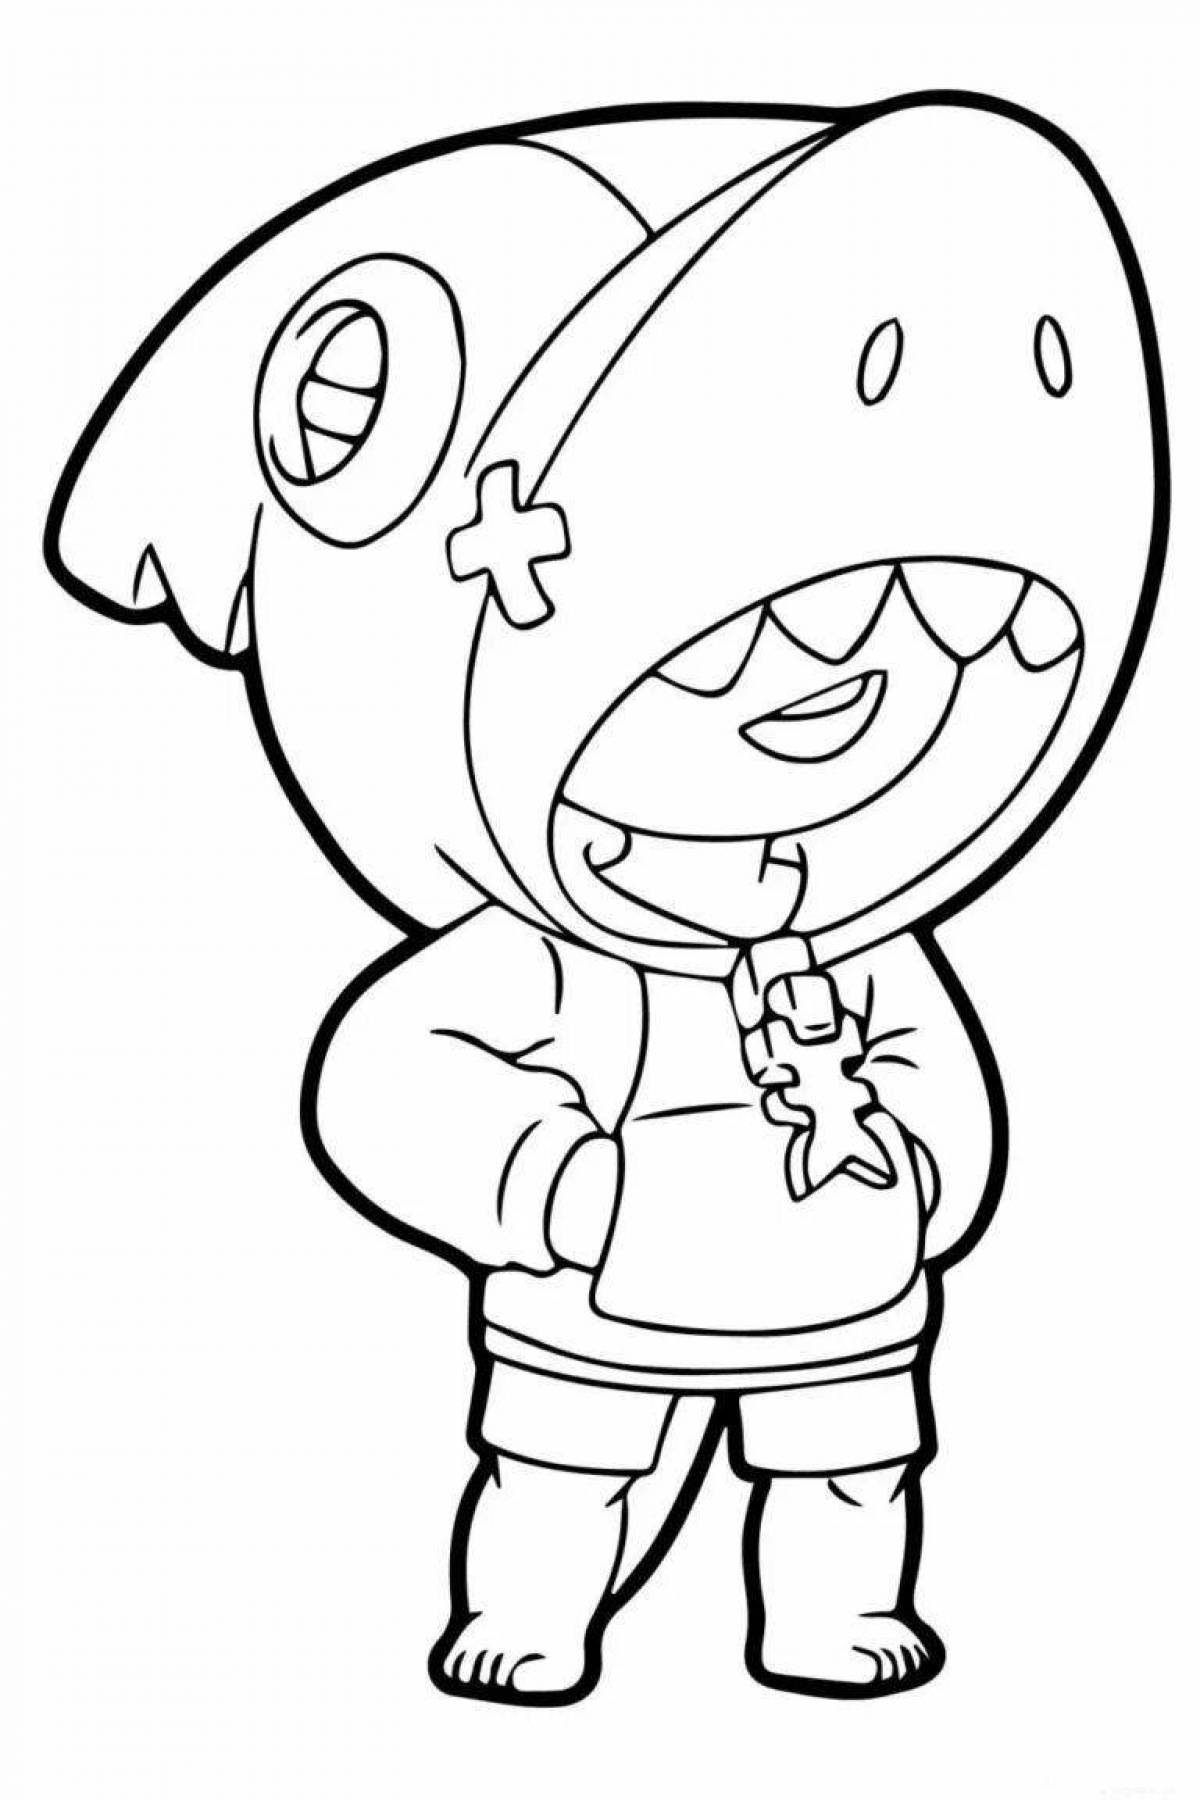 Adorable brown stars coloring pages for boys